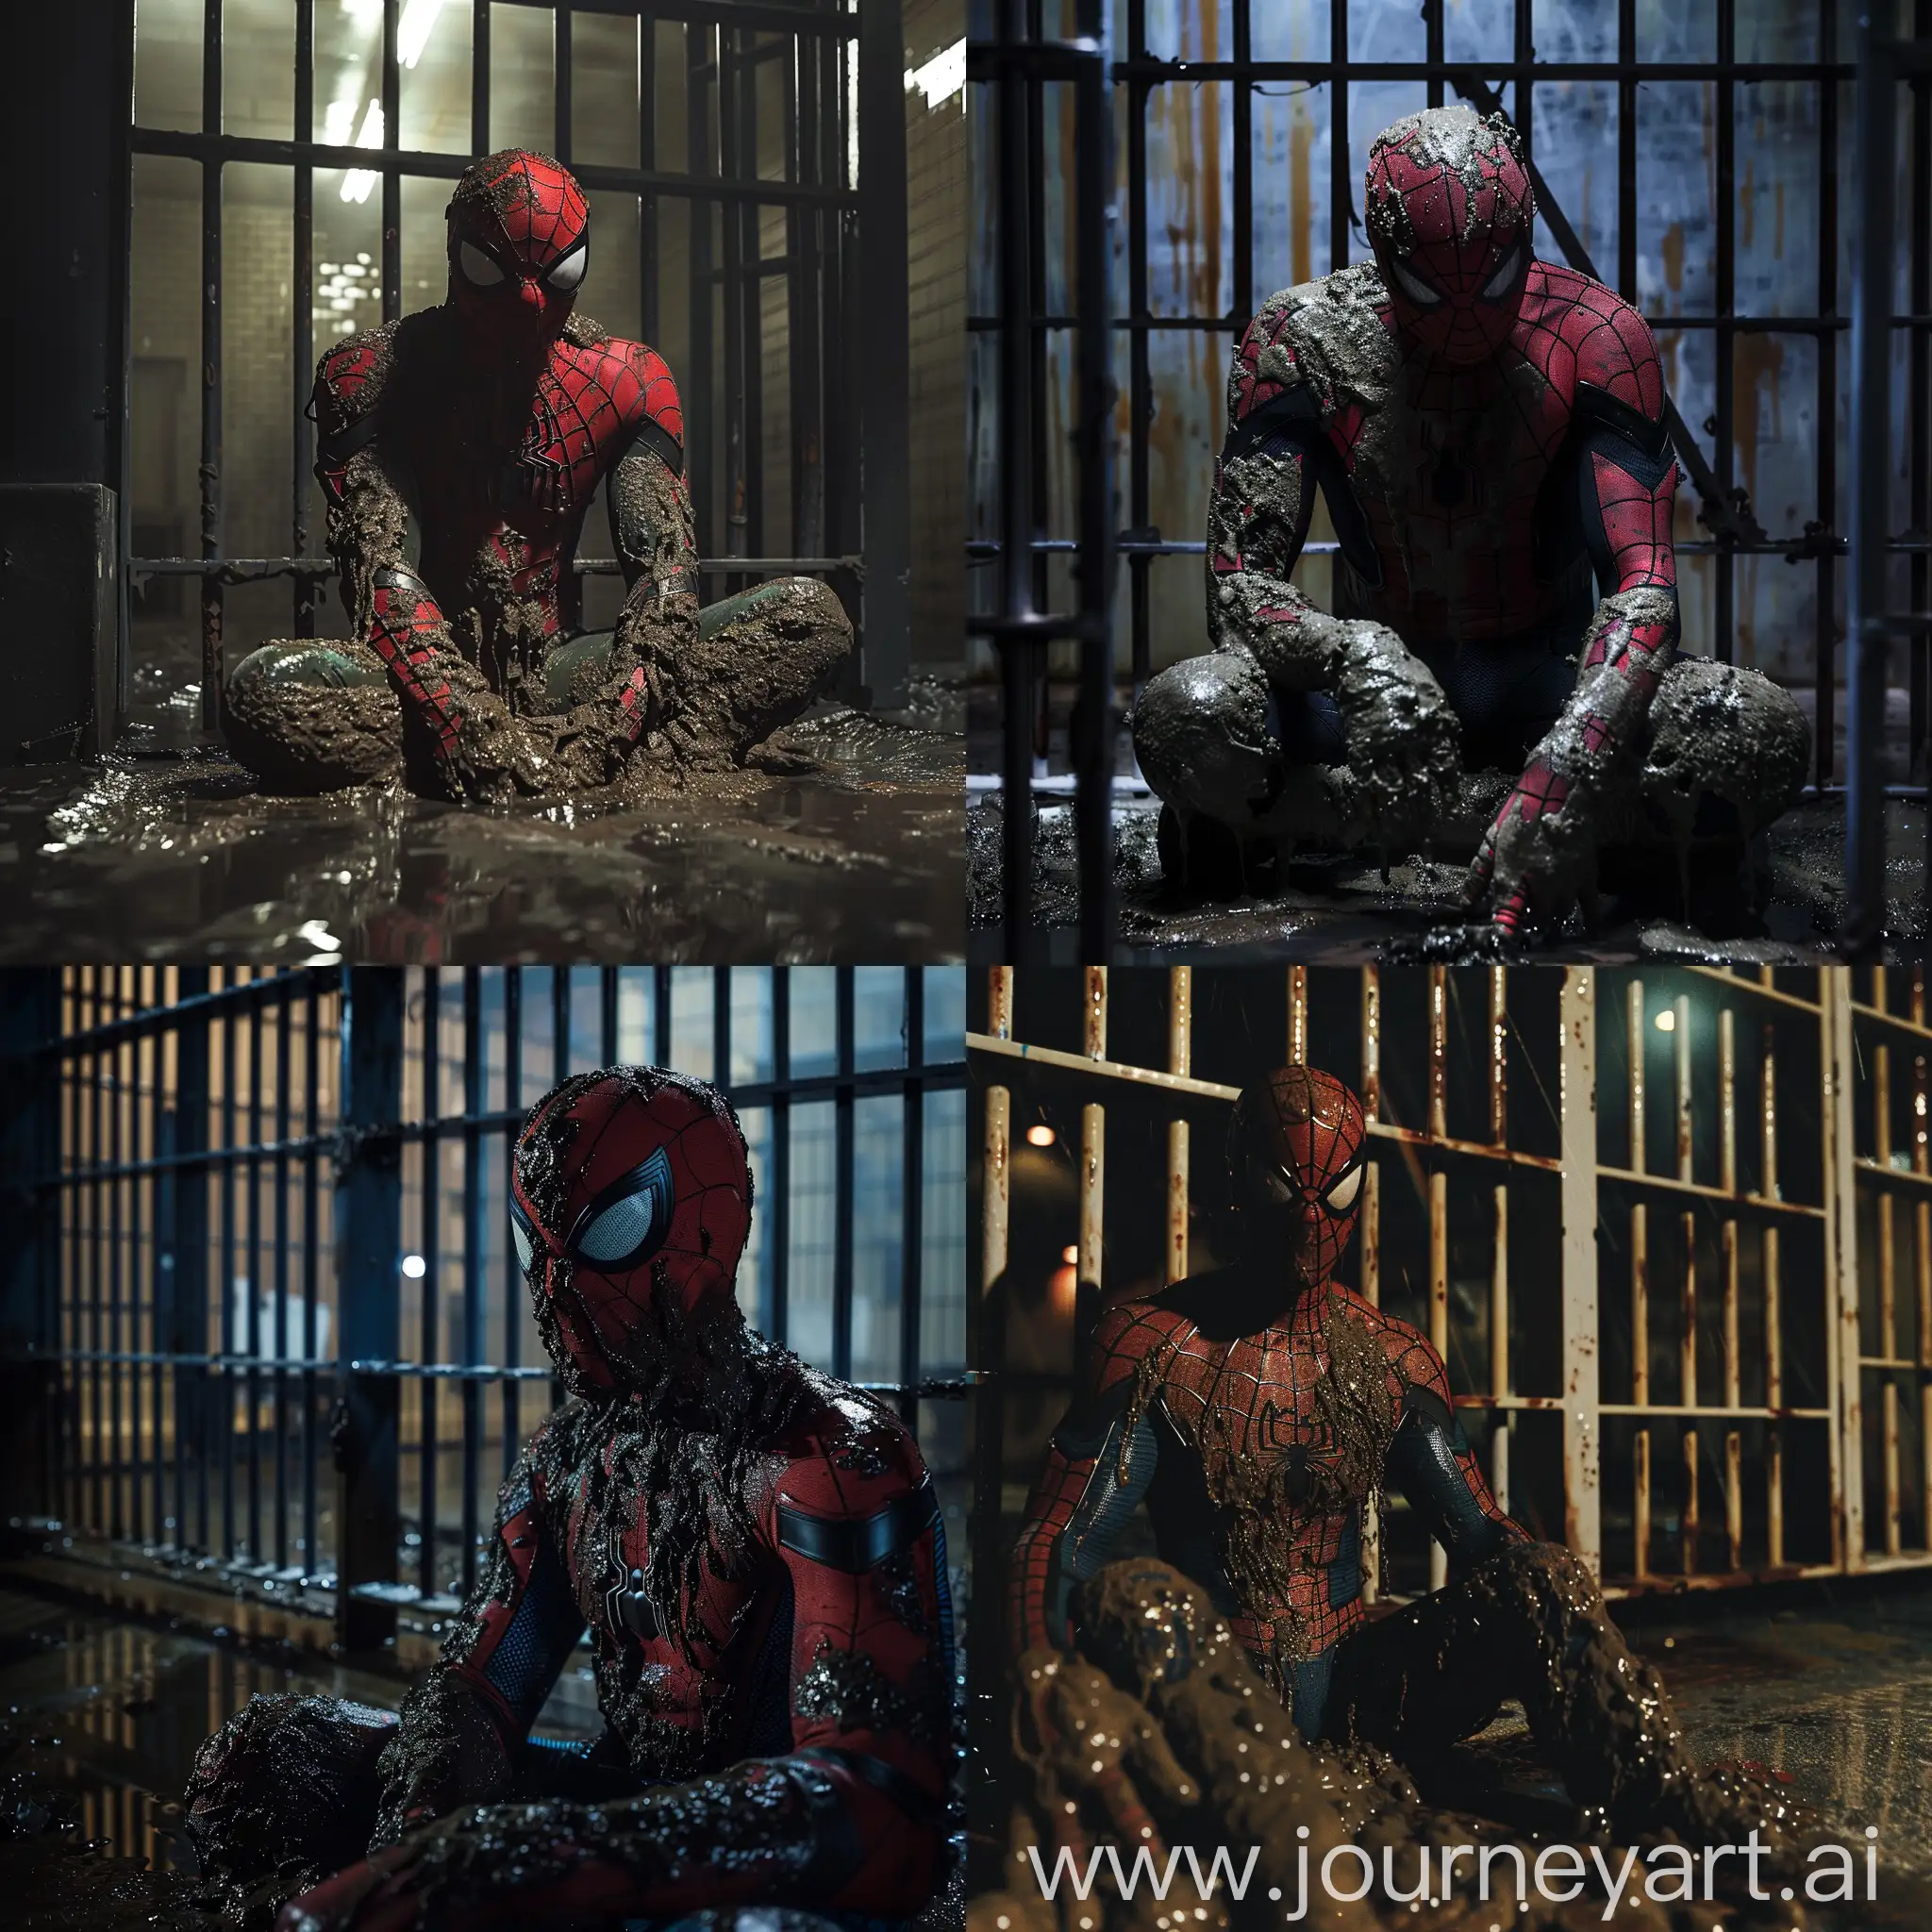 Muddy-Spiderman-Captured-in-Nighttime-Prison-Cell